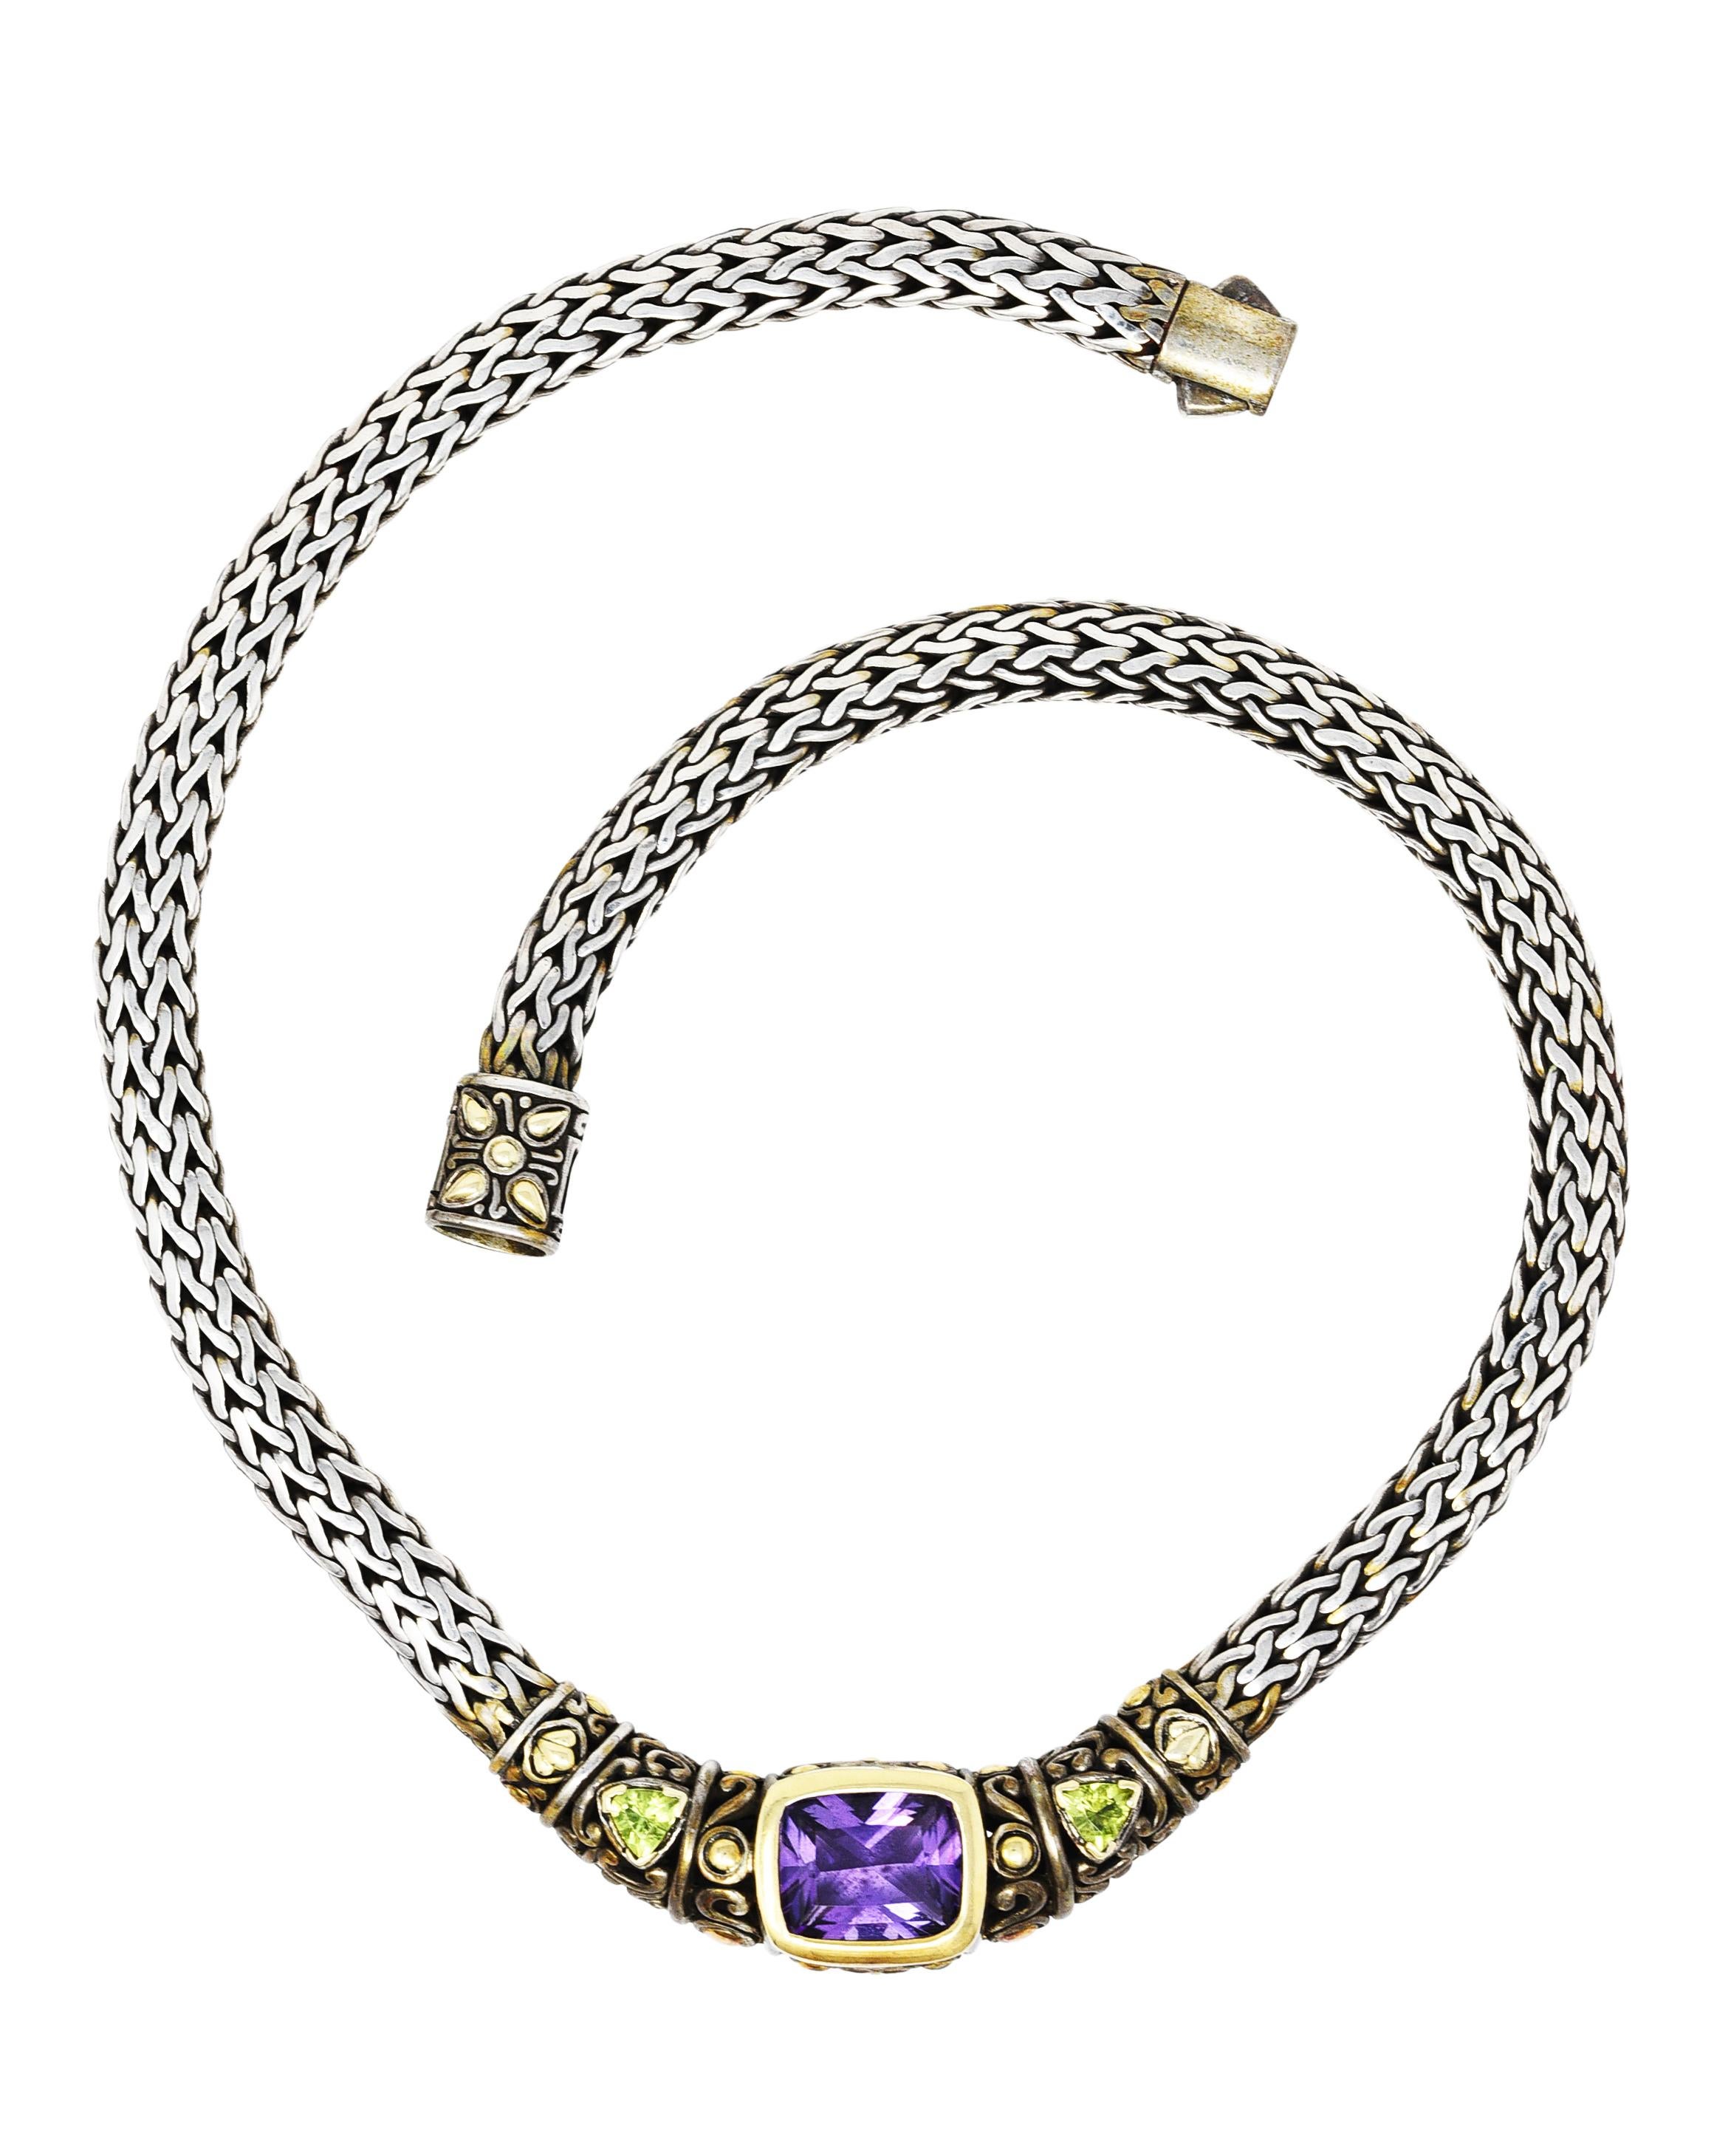 Collar necklace comprised of wheat chain featuring a center station

Centering cushion cut amethyst measuring approximately 13.2 x 11.0 mm

Medium light in saturation - pinkish purple in color and bezel set in gold

Flanked by two trillion cut